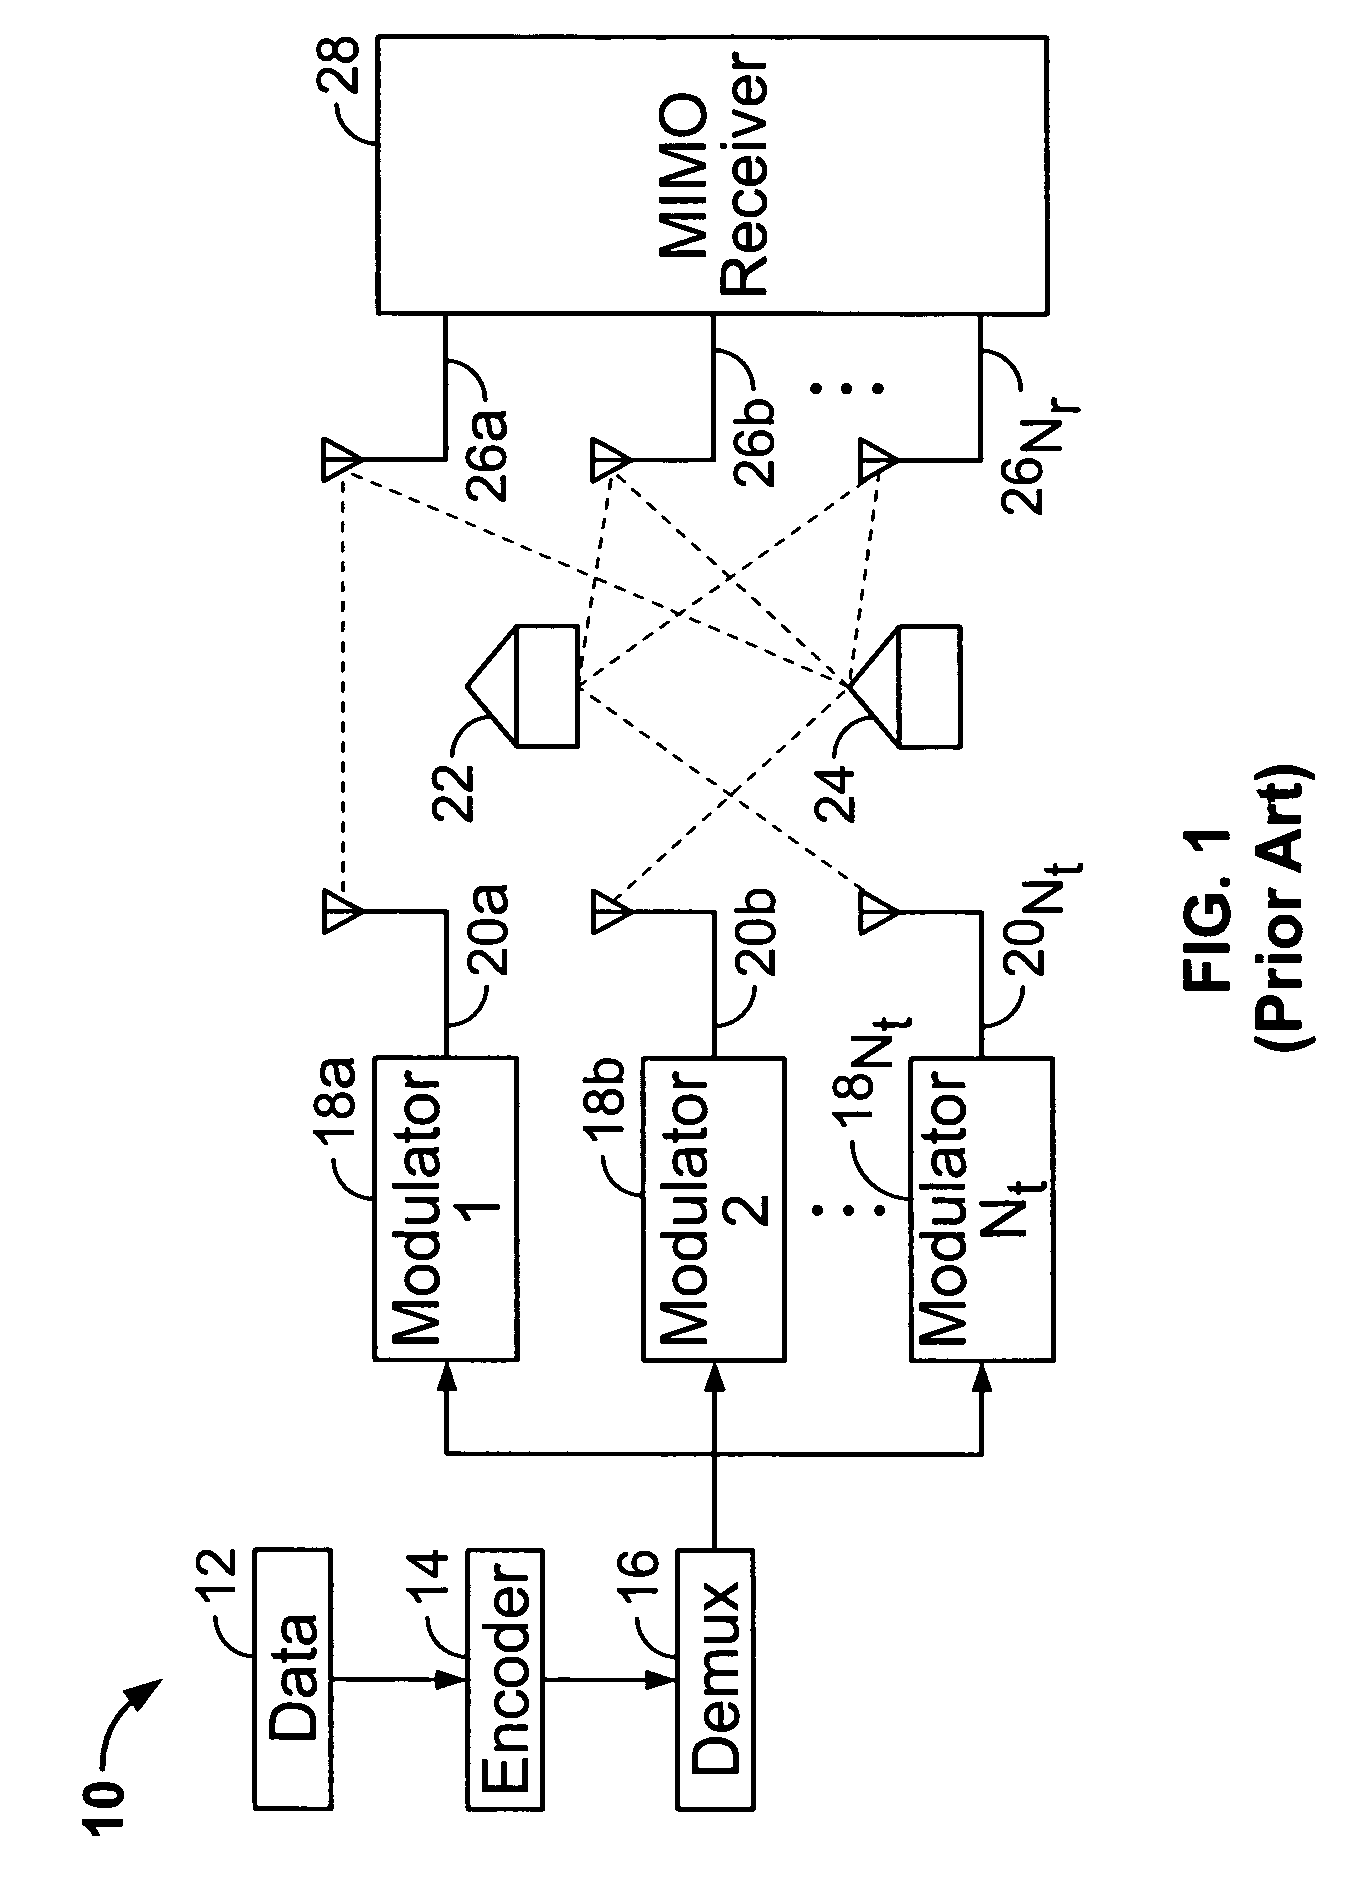 Trellis-based feedback reduction for multiple input multiple output orthogonal frequency division multiplexing (MIMO-OFDM) with rate-limited feedback